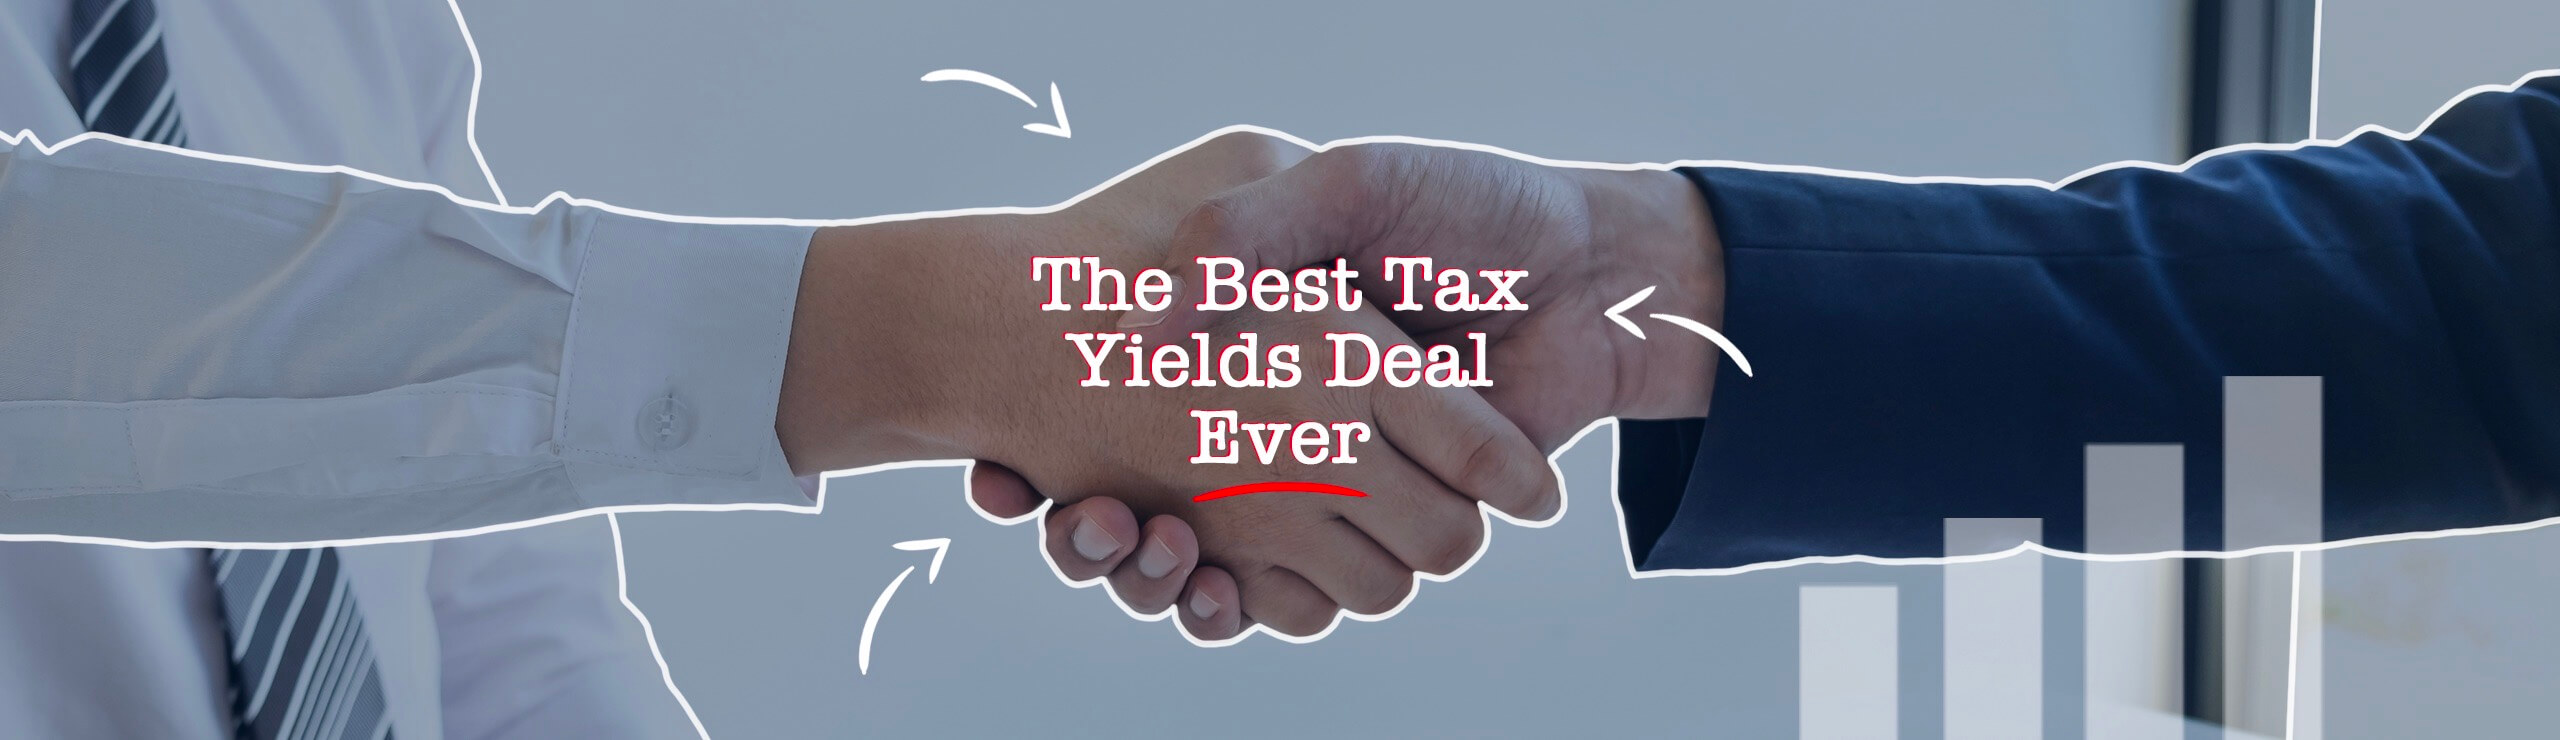 The Best Tax Yields Deal Ever